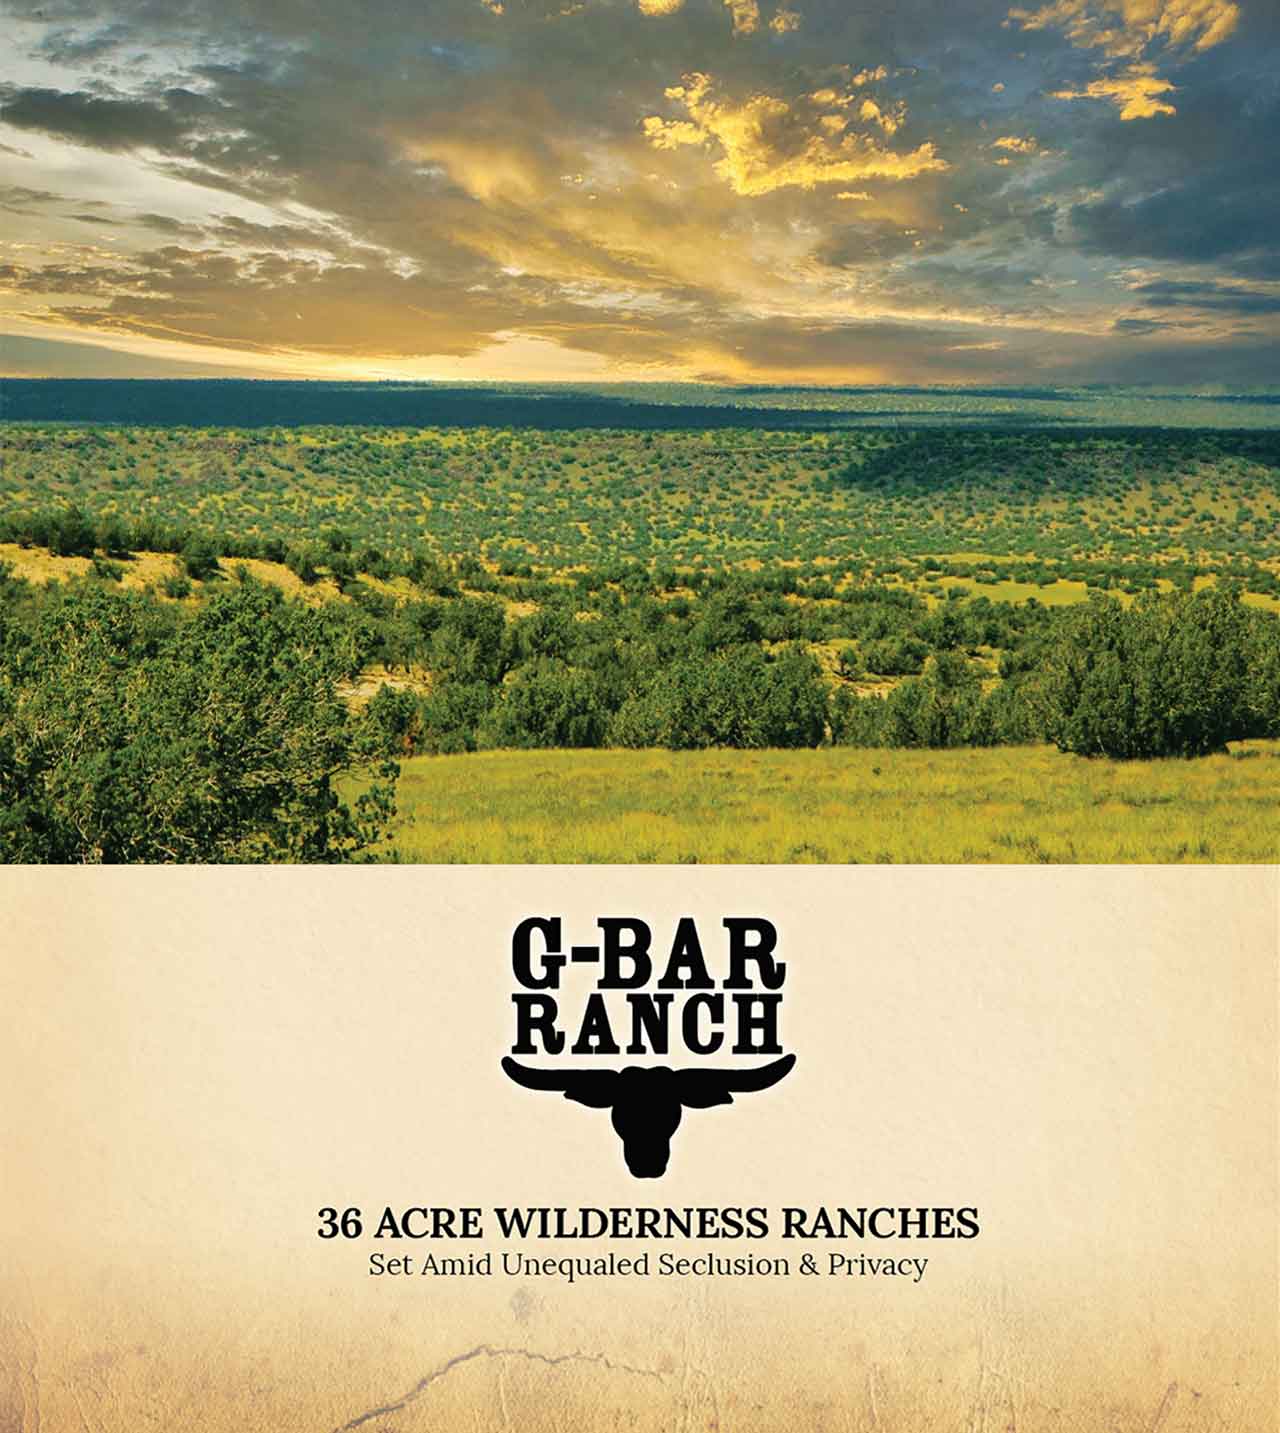 G-Bar Ranch: 36 Acre Wilderness Ranches Set Amid Unequaled Seclusion and Privacy